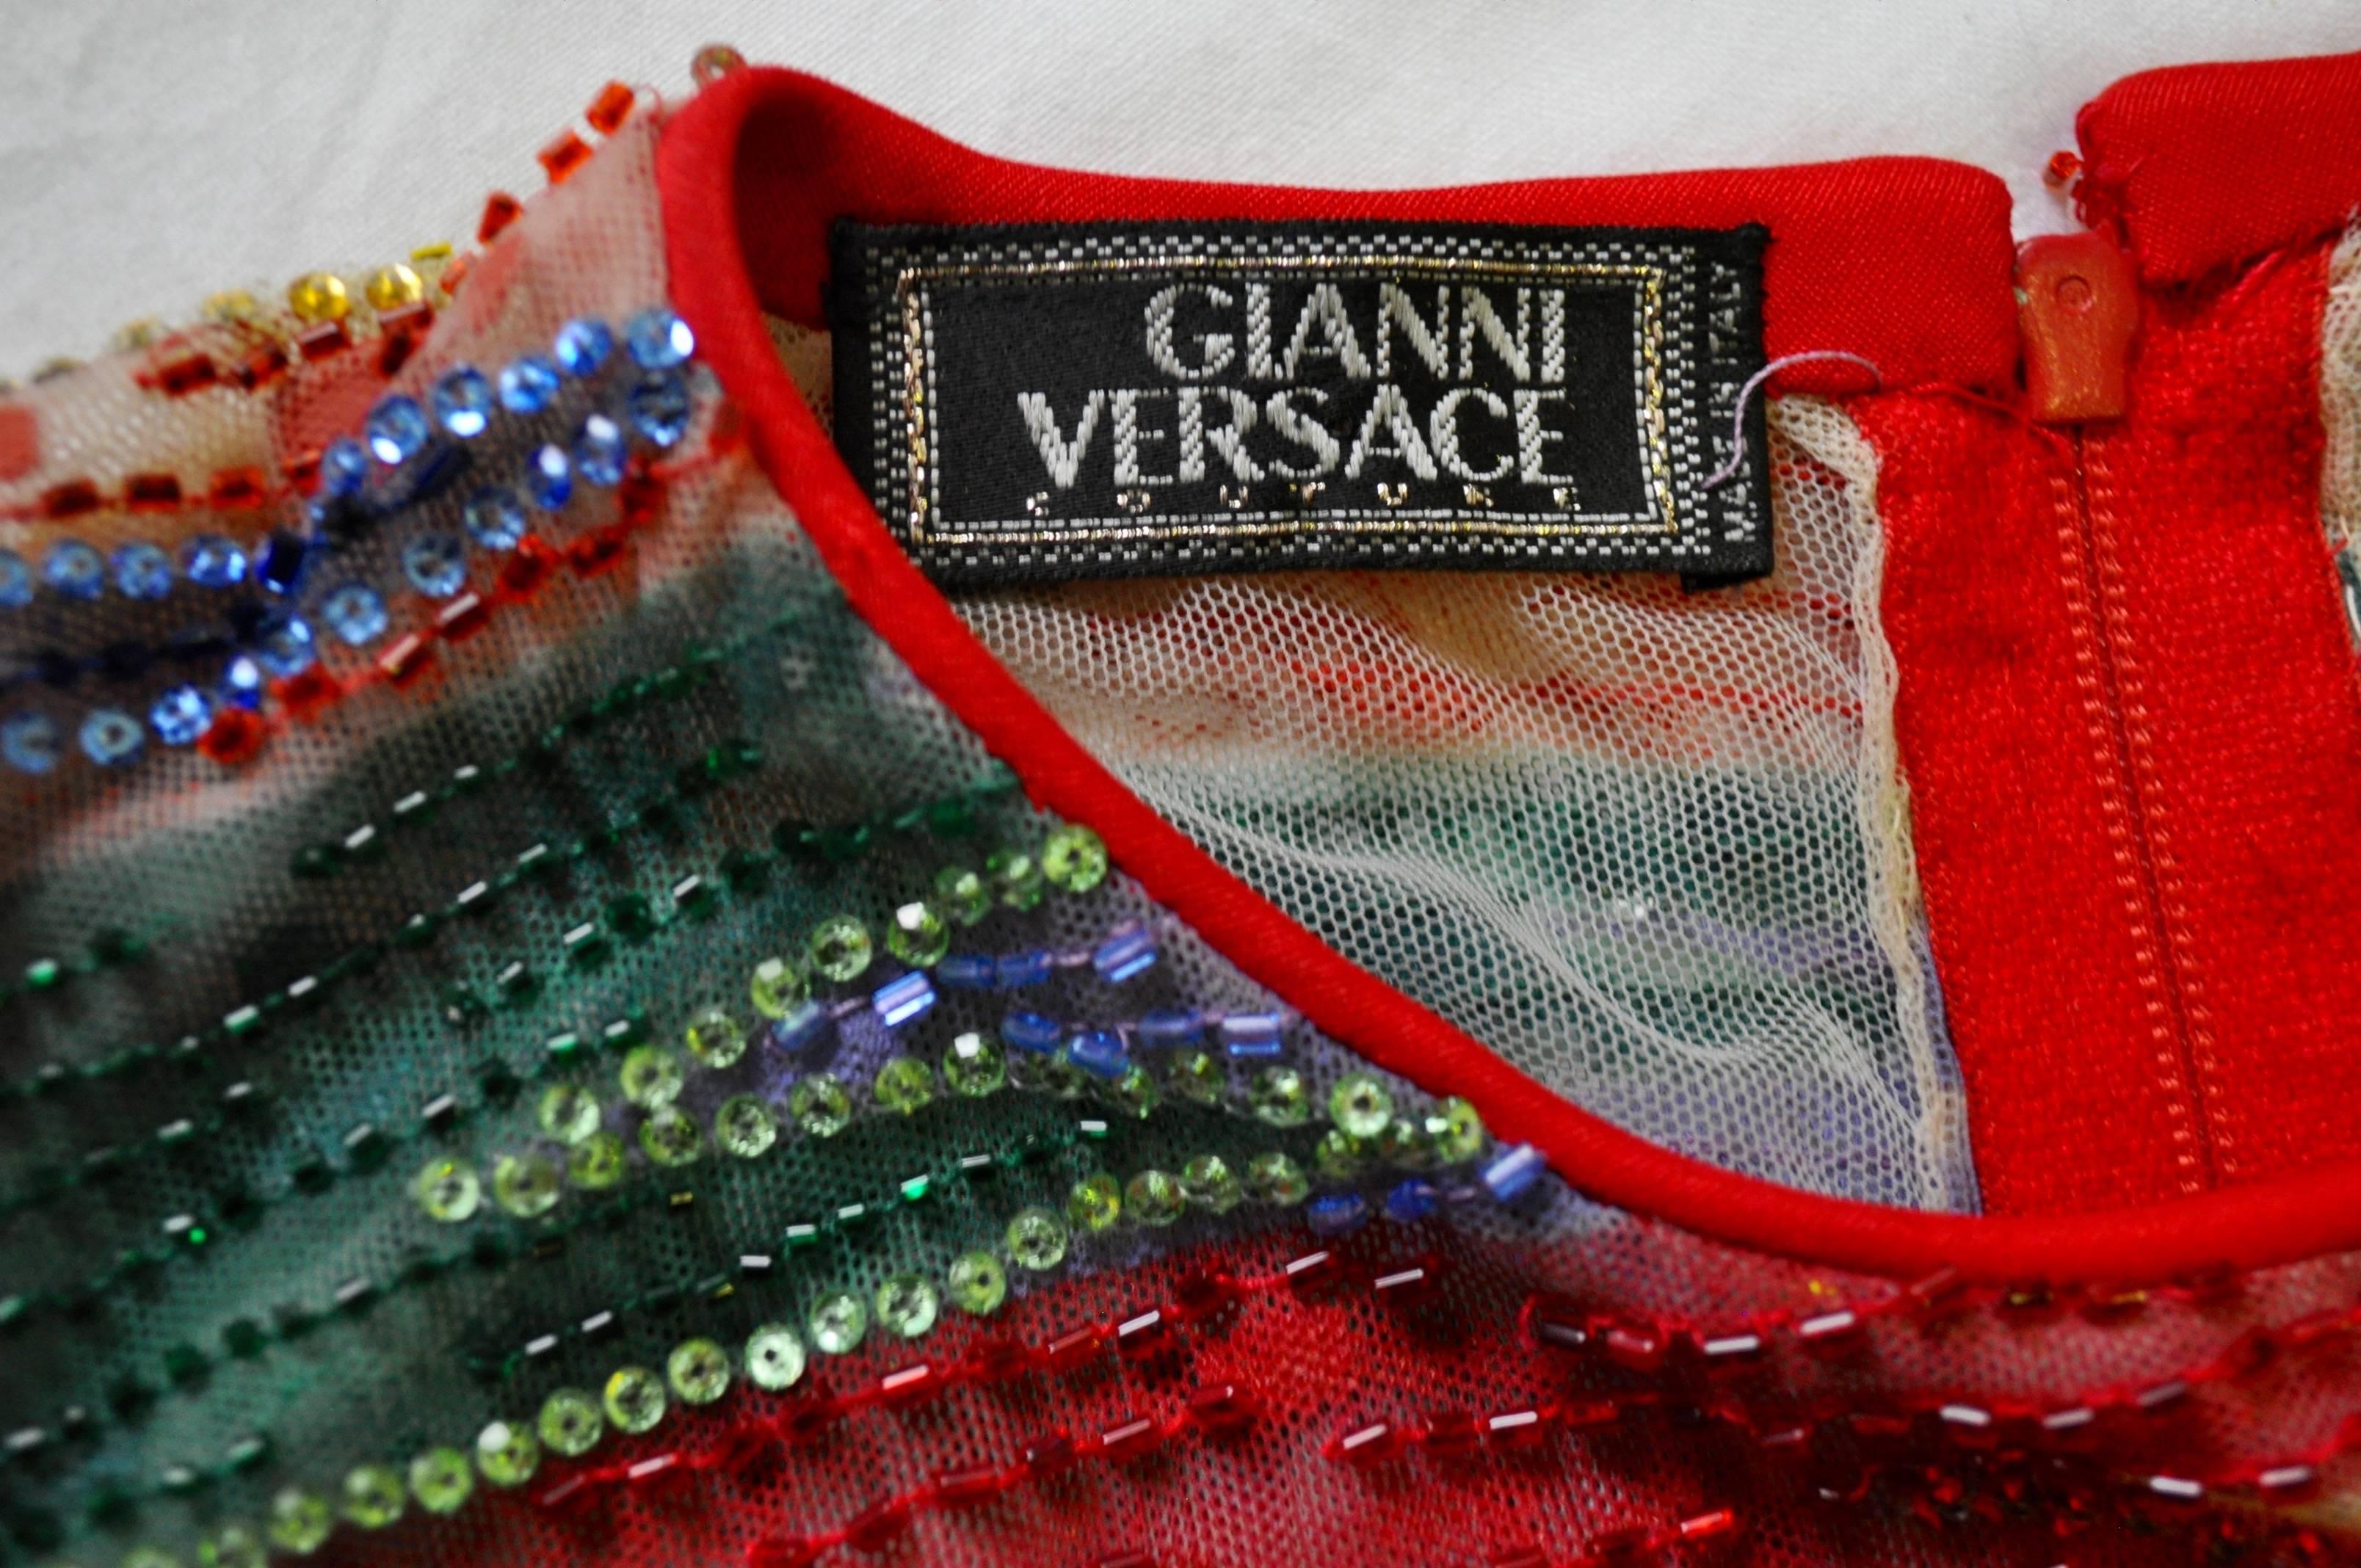 Gray Extremely Rare Gianni Versace Couture Rainbow Embroidered Sequin Bodysuit For Sale